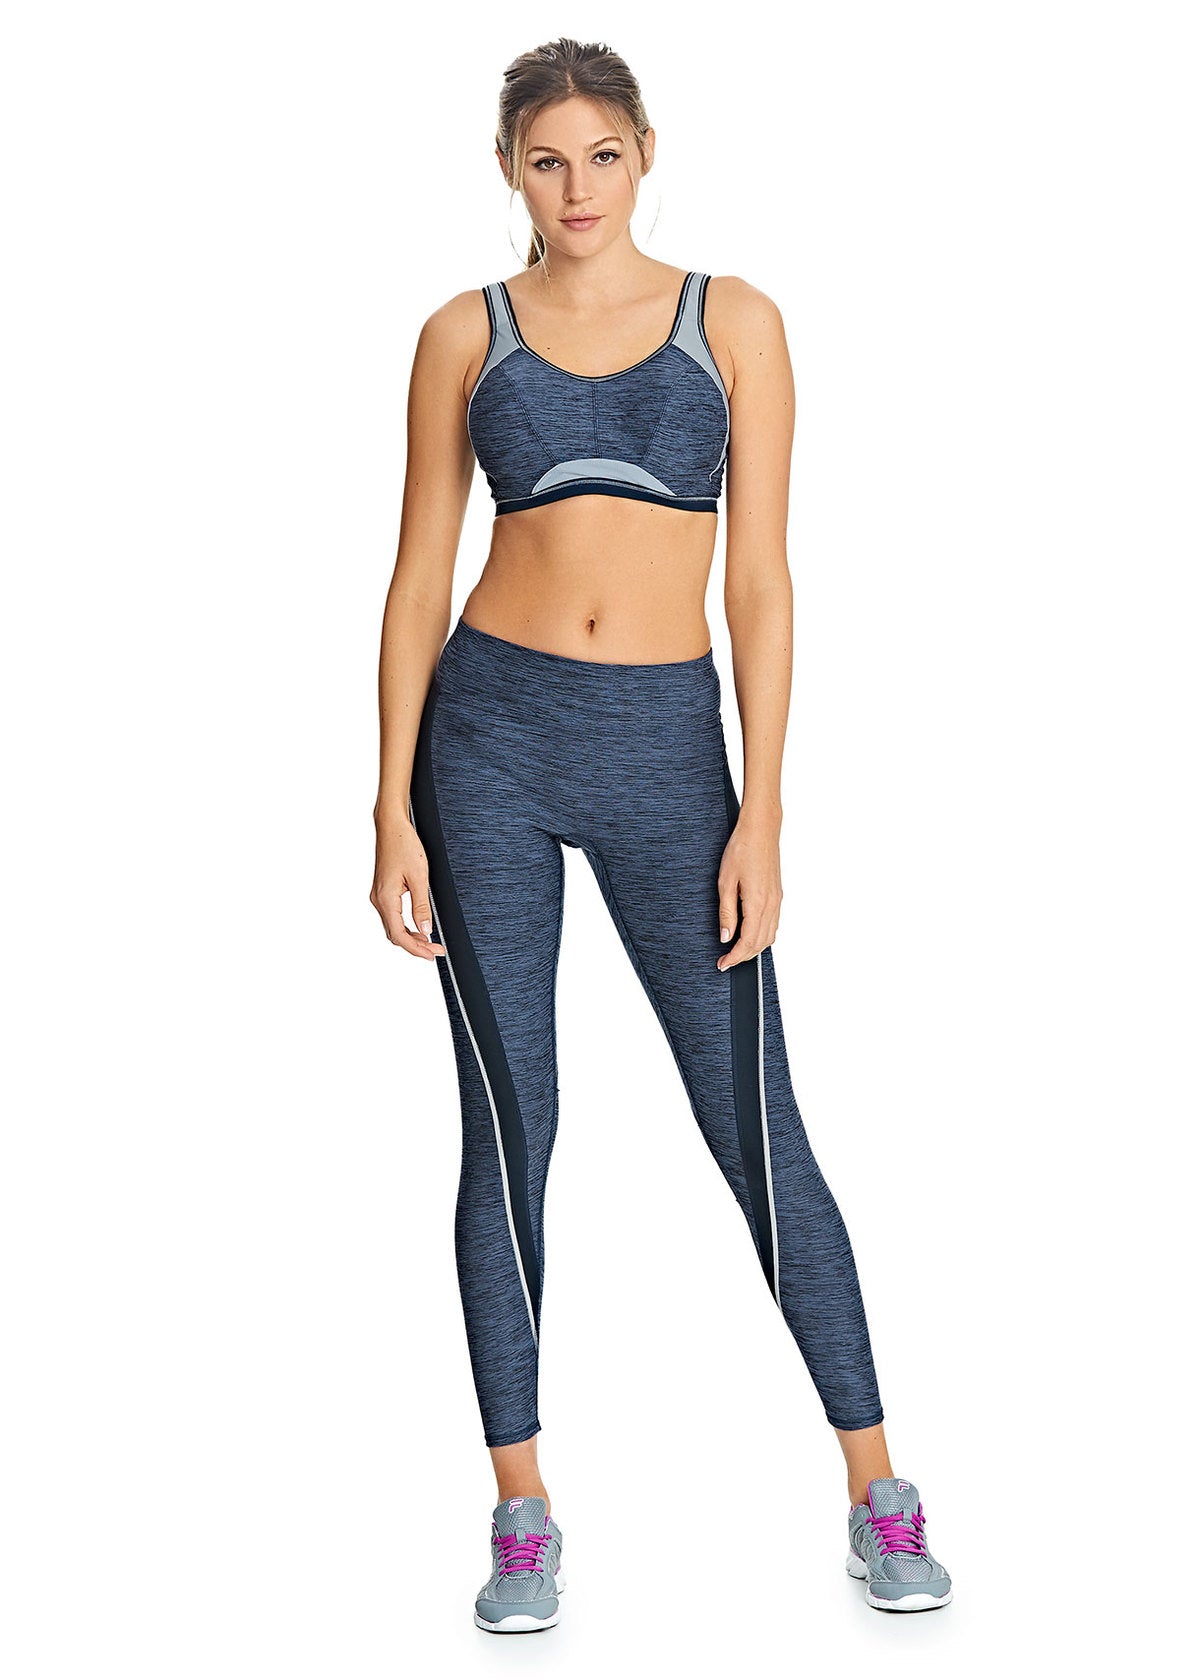 Force Carbon Soft Cup Crop Top Sports Bra from Freya